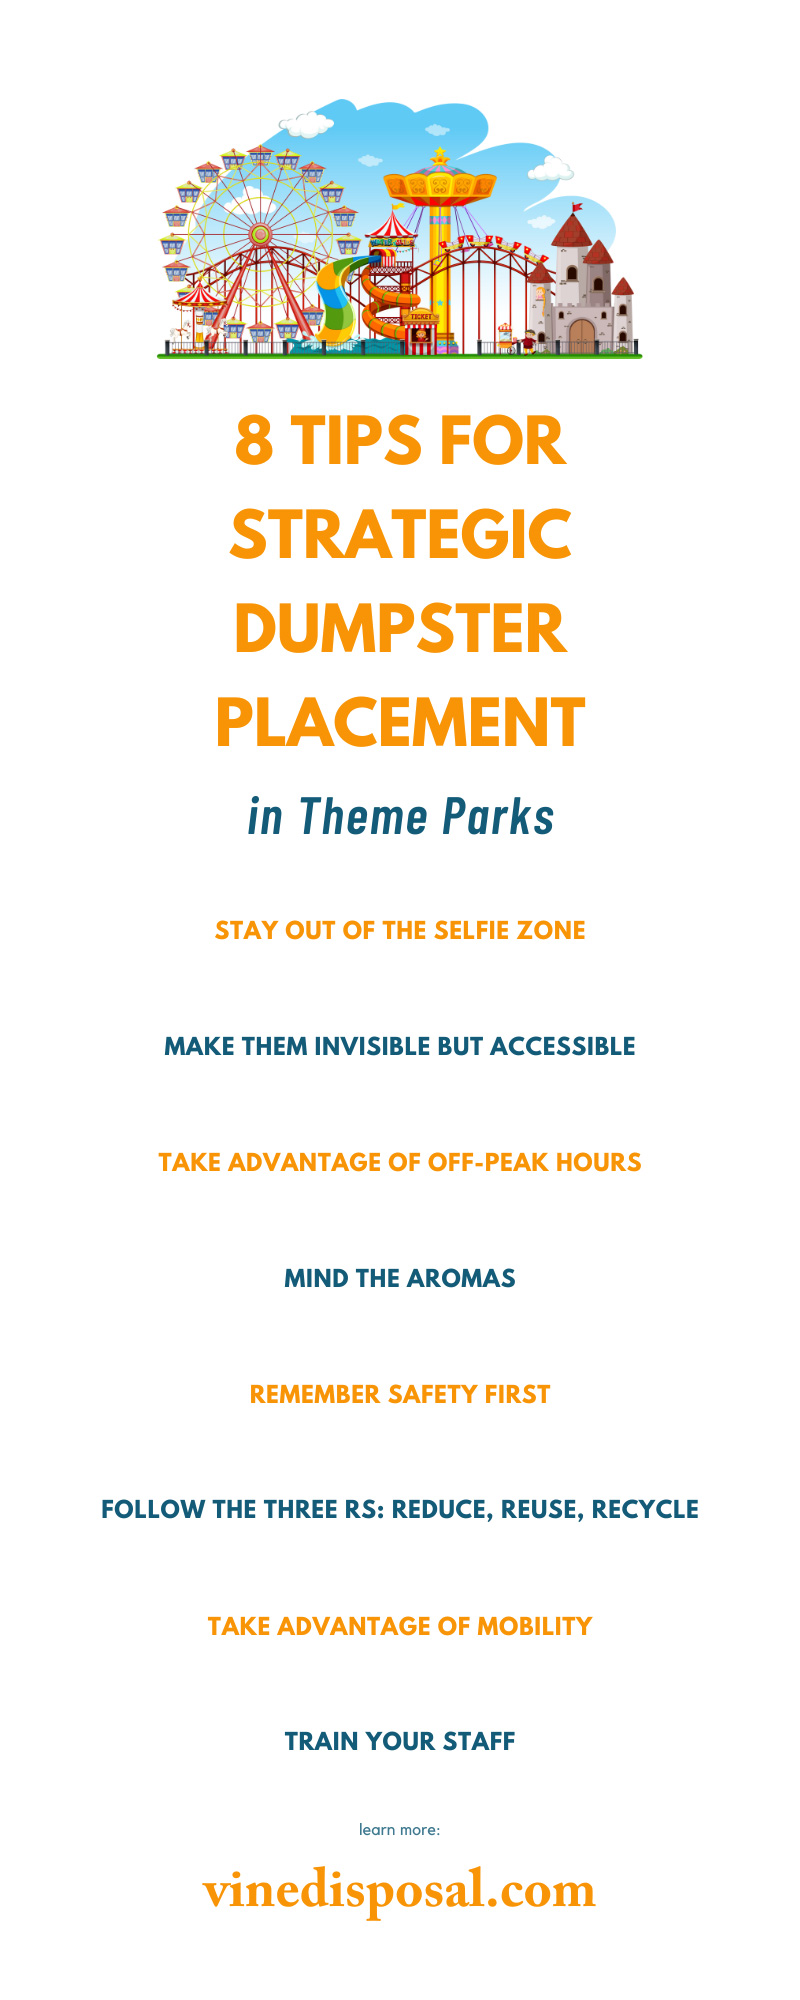 8 Tips for Strategic Dumpster Placement in Theme Parks